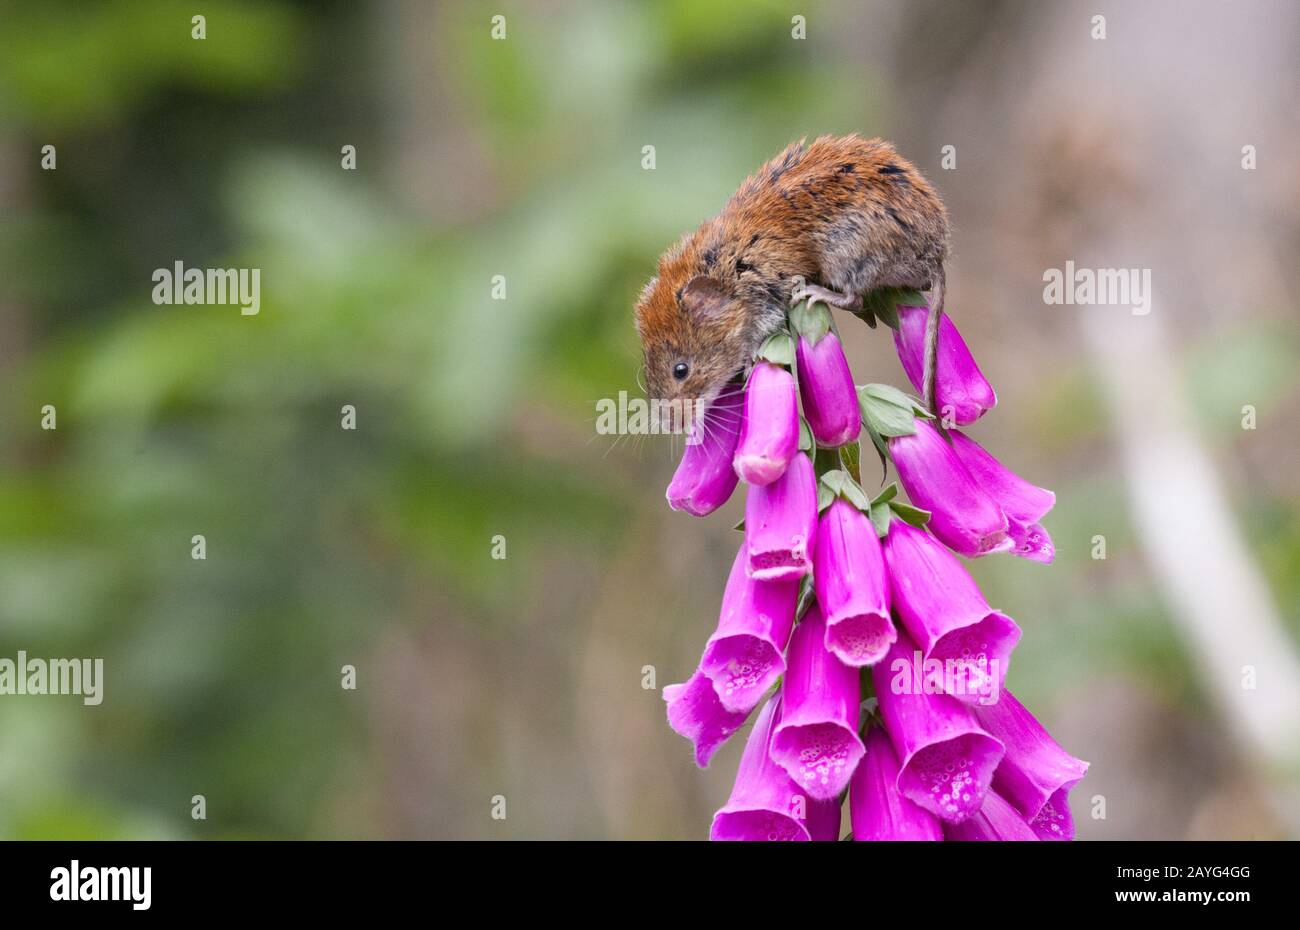 Bank vole perched on foxglove. Stock Photo